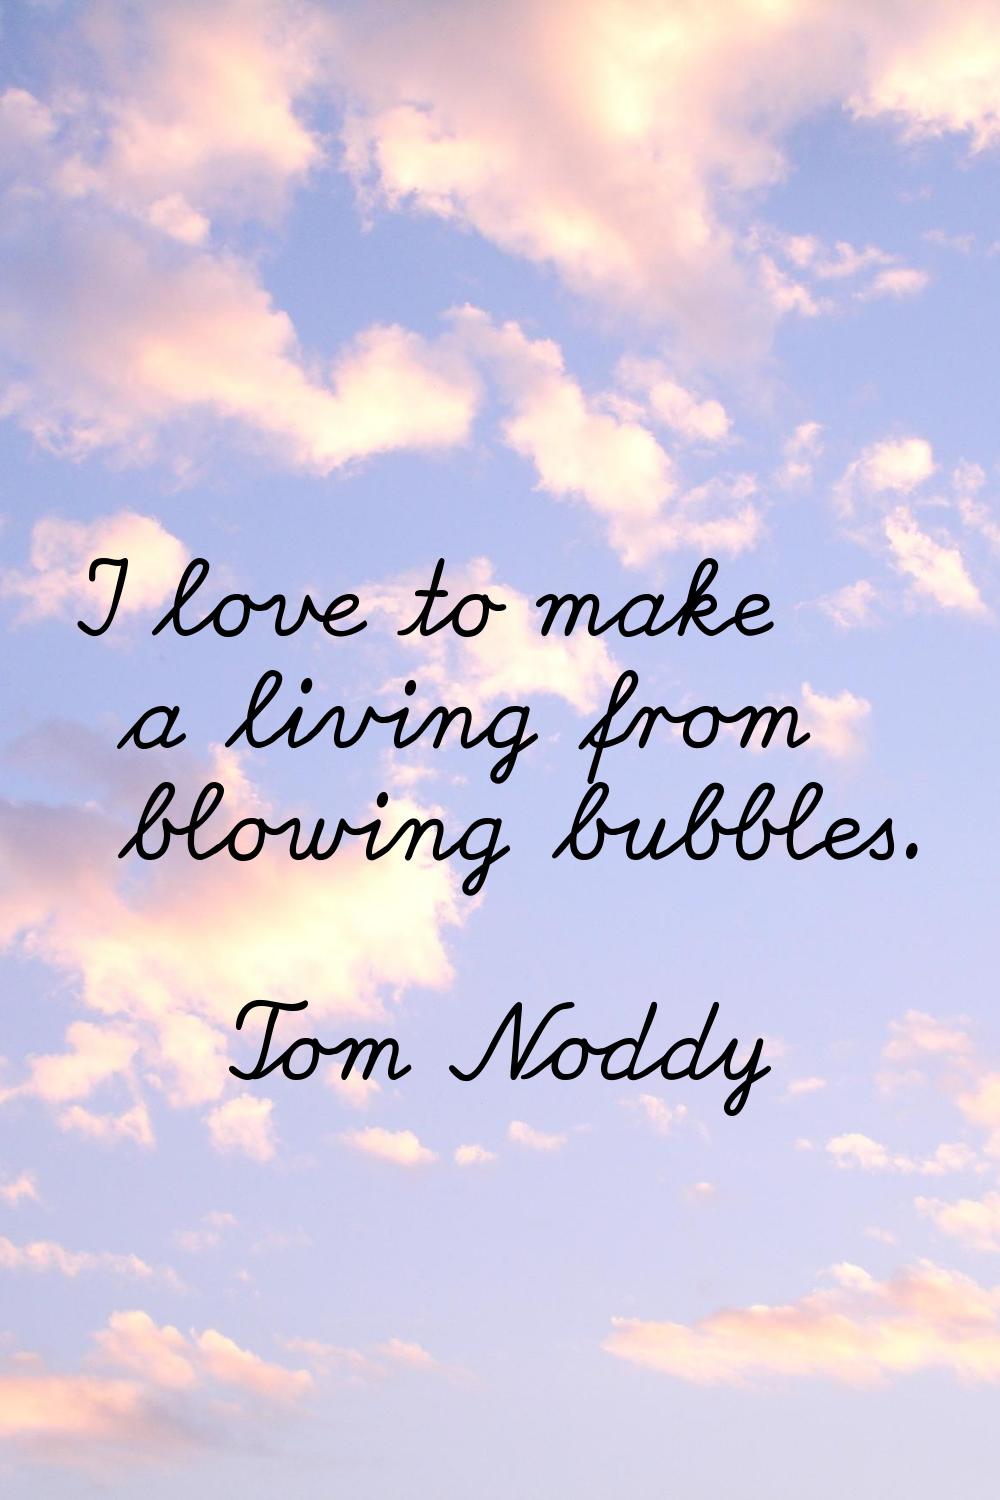 I love to make a living from blowing bubbles.